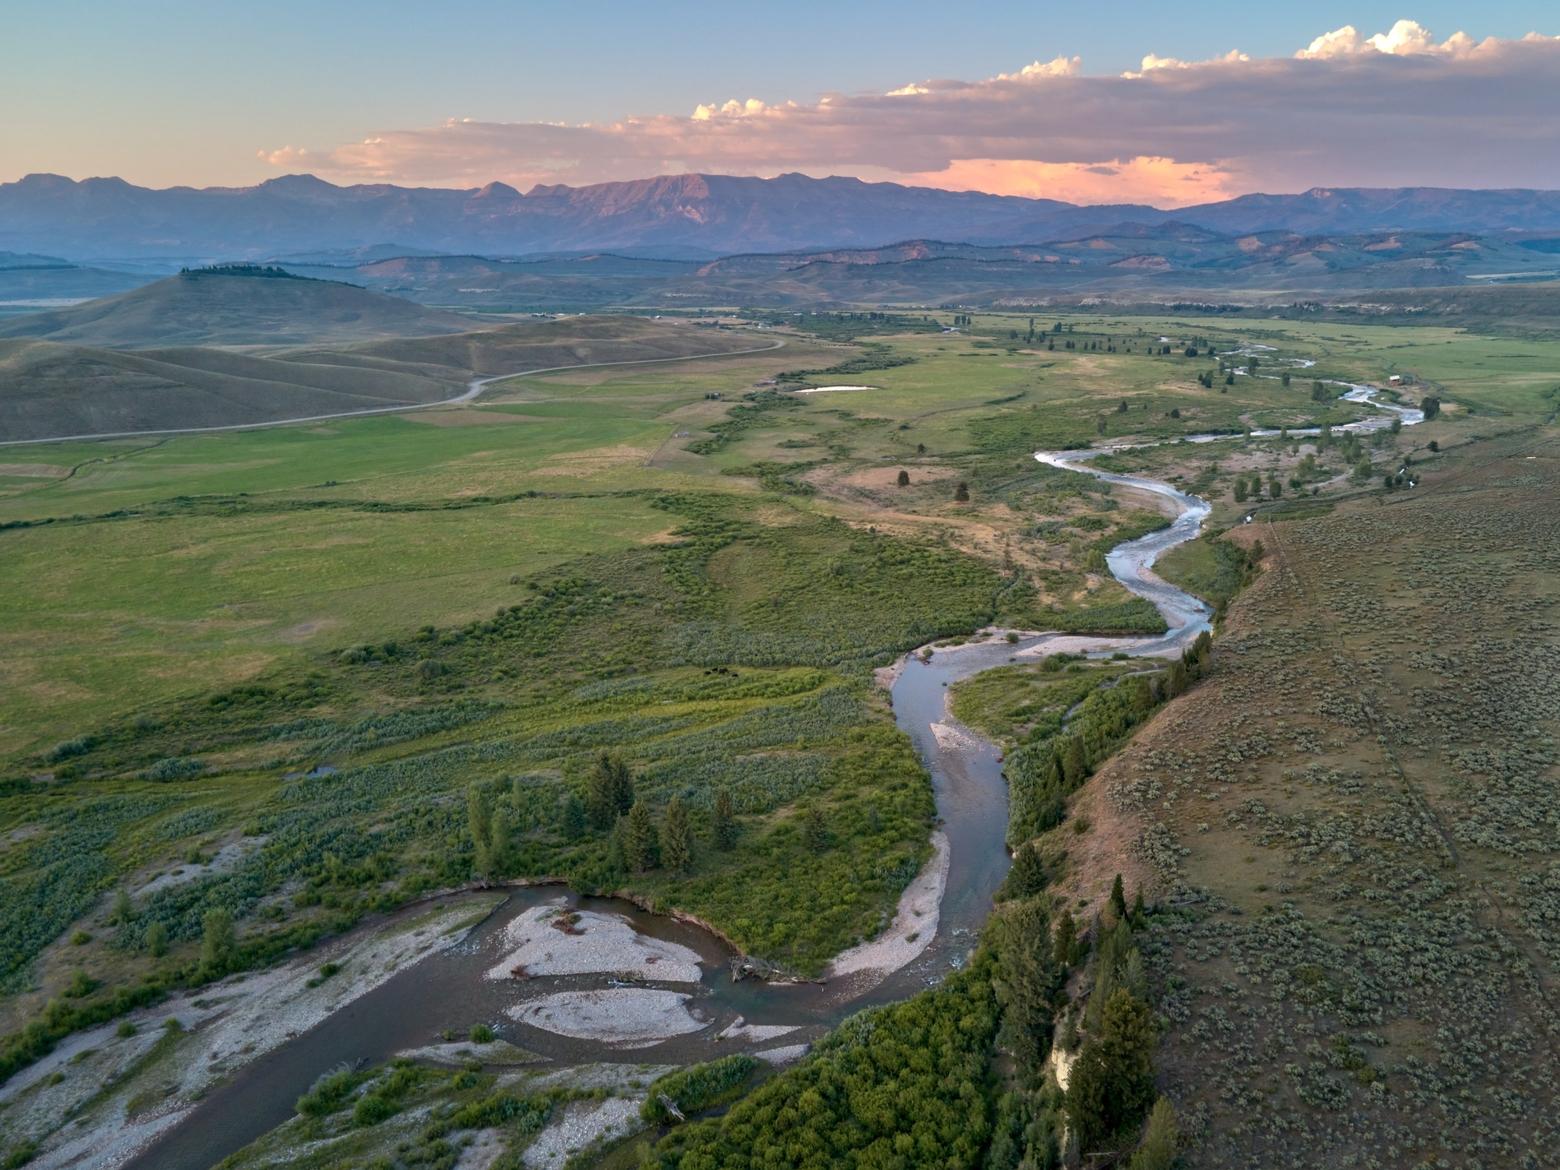 The Hoback River, a 55-mile long tributary of the Snake River, flows toward the Gros Ventre Range in northwestern Wyoming. Until about 20 years ago, most of the Hoback River Valley consisted of ranchlands, writes Susan Marsh. Then a ranch was purchased and subdivided. Are the flood gates now open? Photo by Jon Mullen/Ecostock